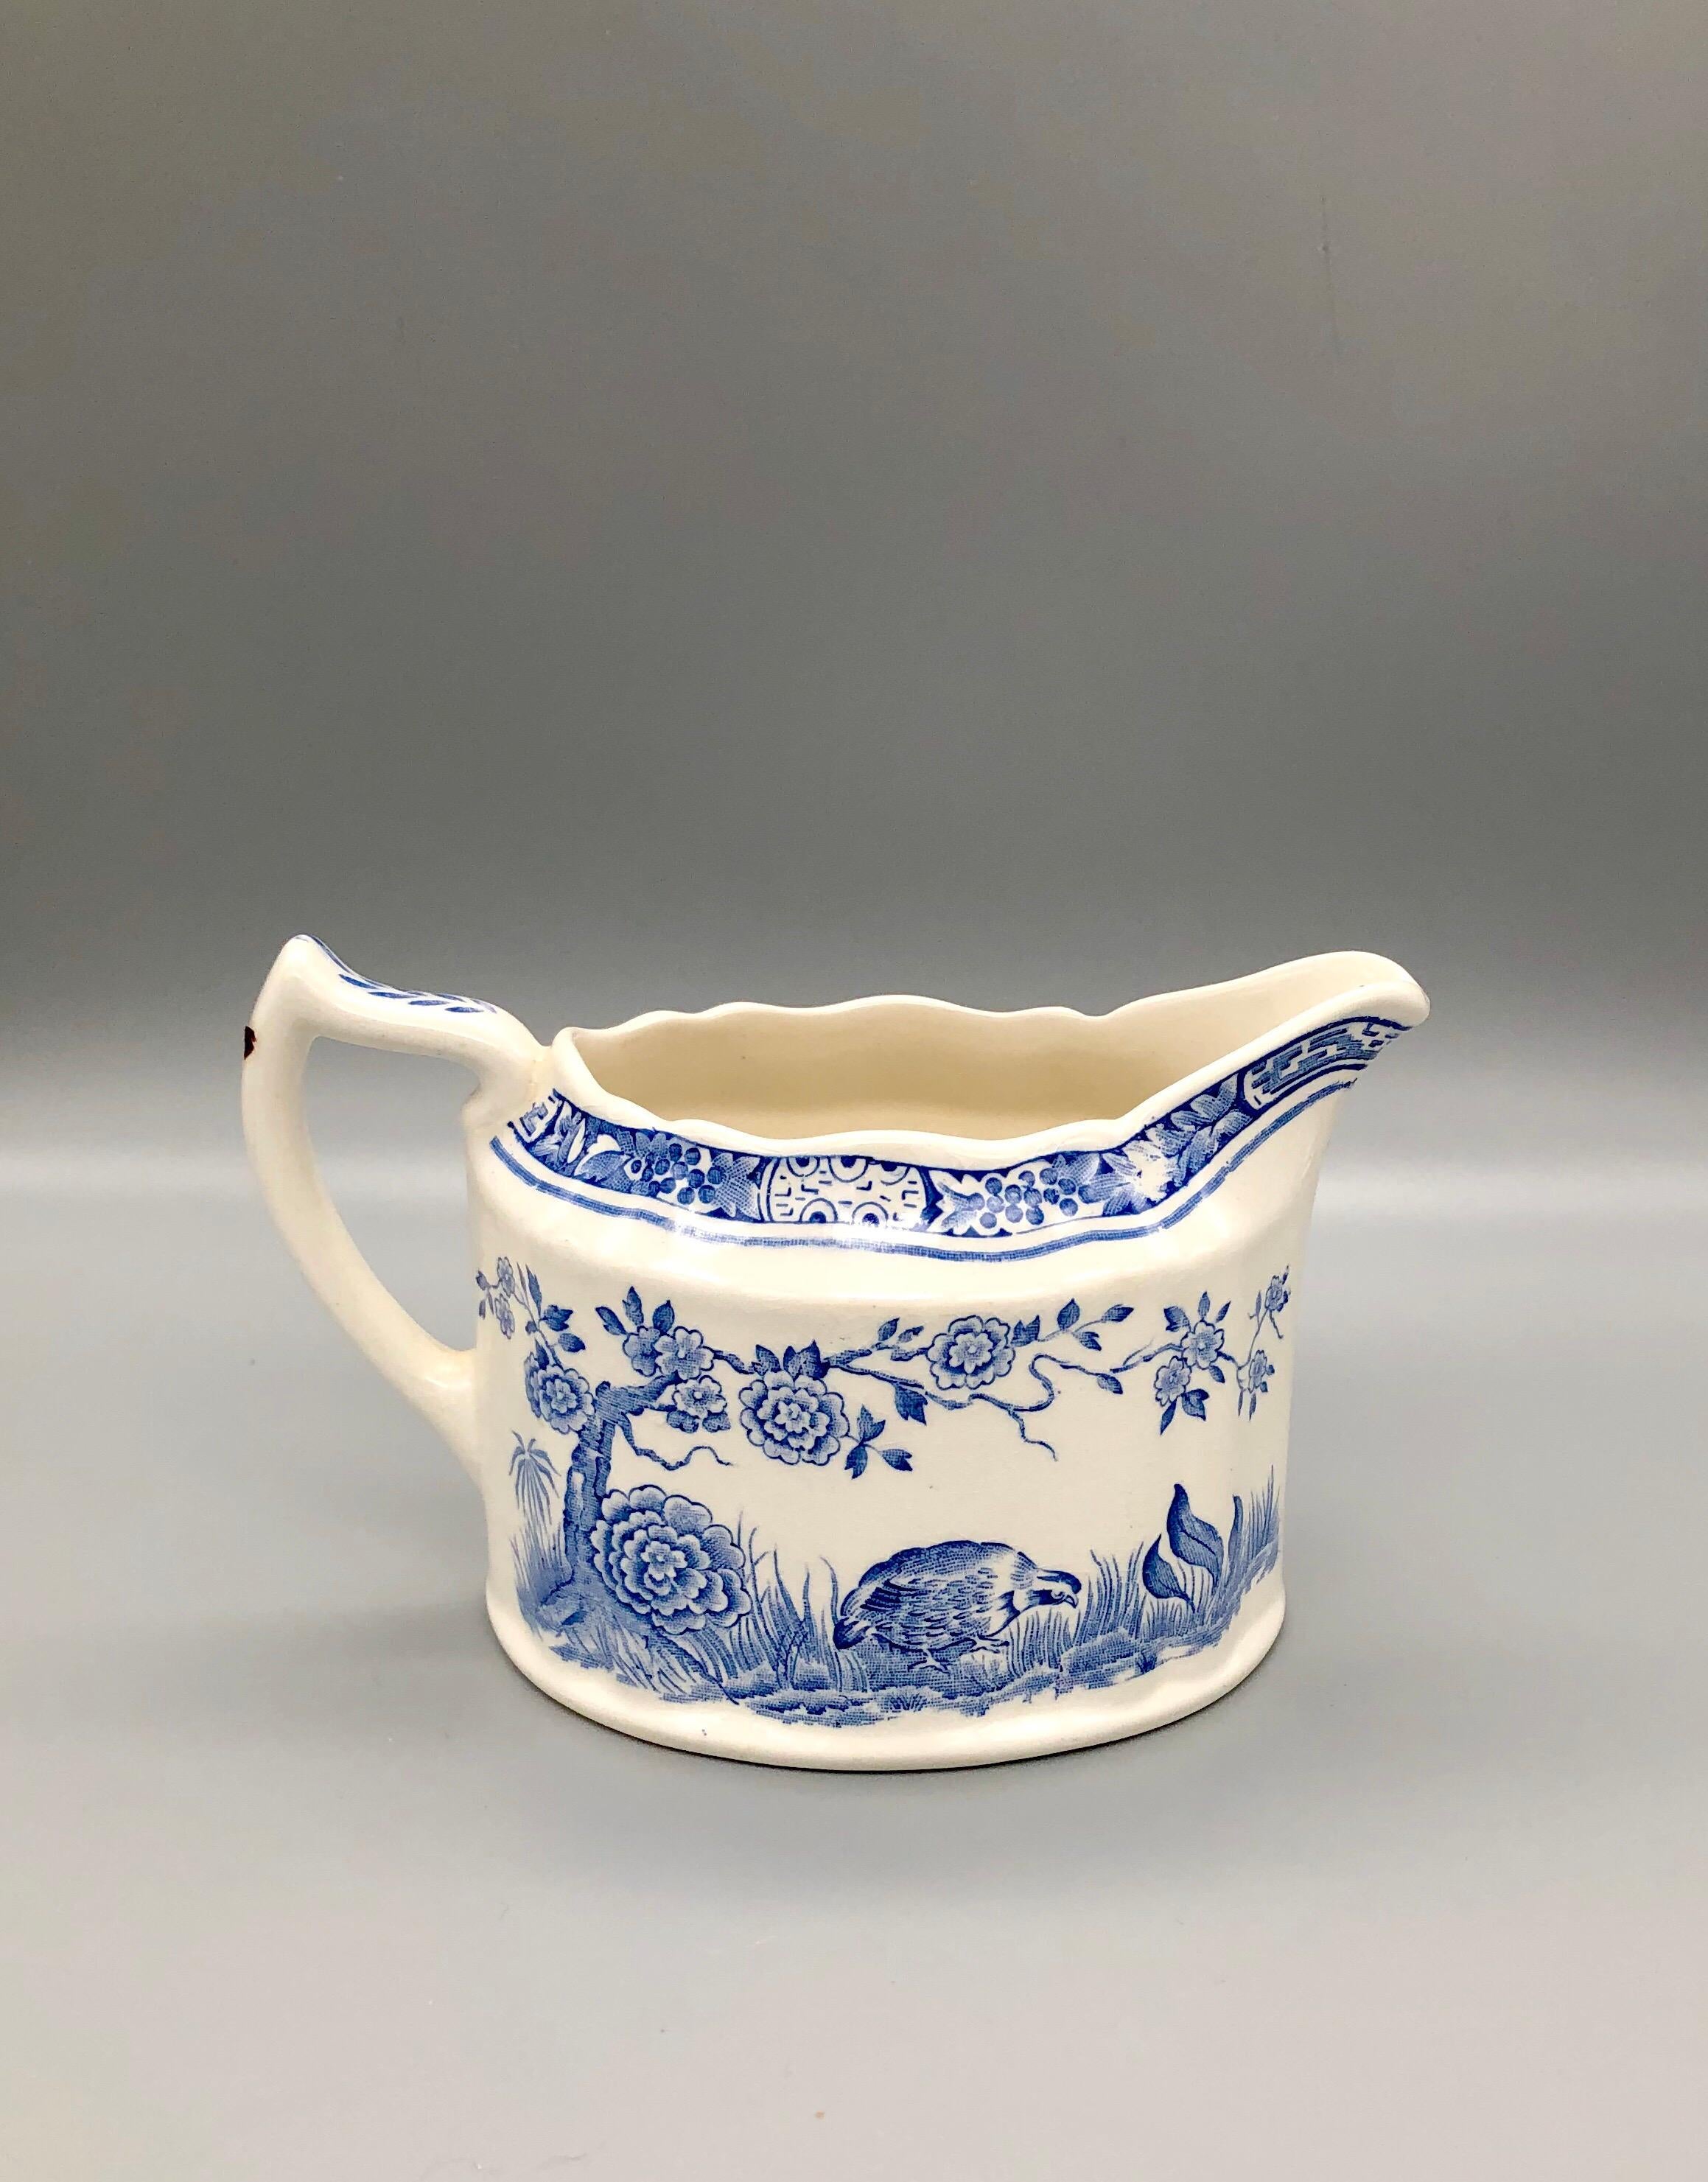 Blue and White Furnivals Quail 1913 Pottery Teapot, Creamer and Sugar Bowl Set For Sale 6